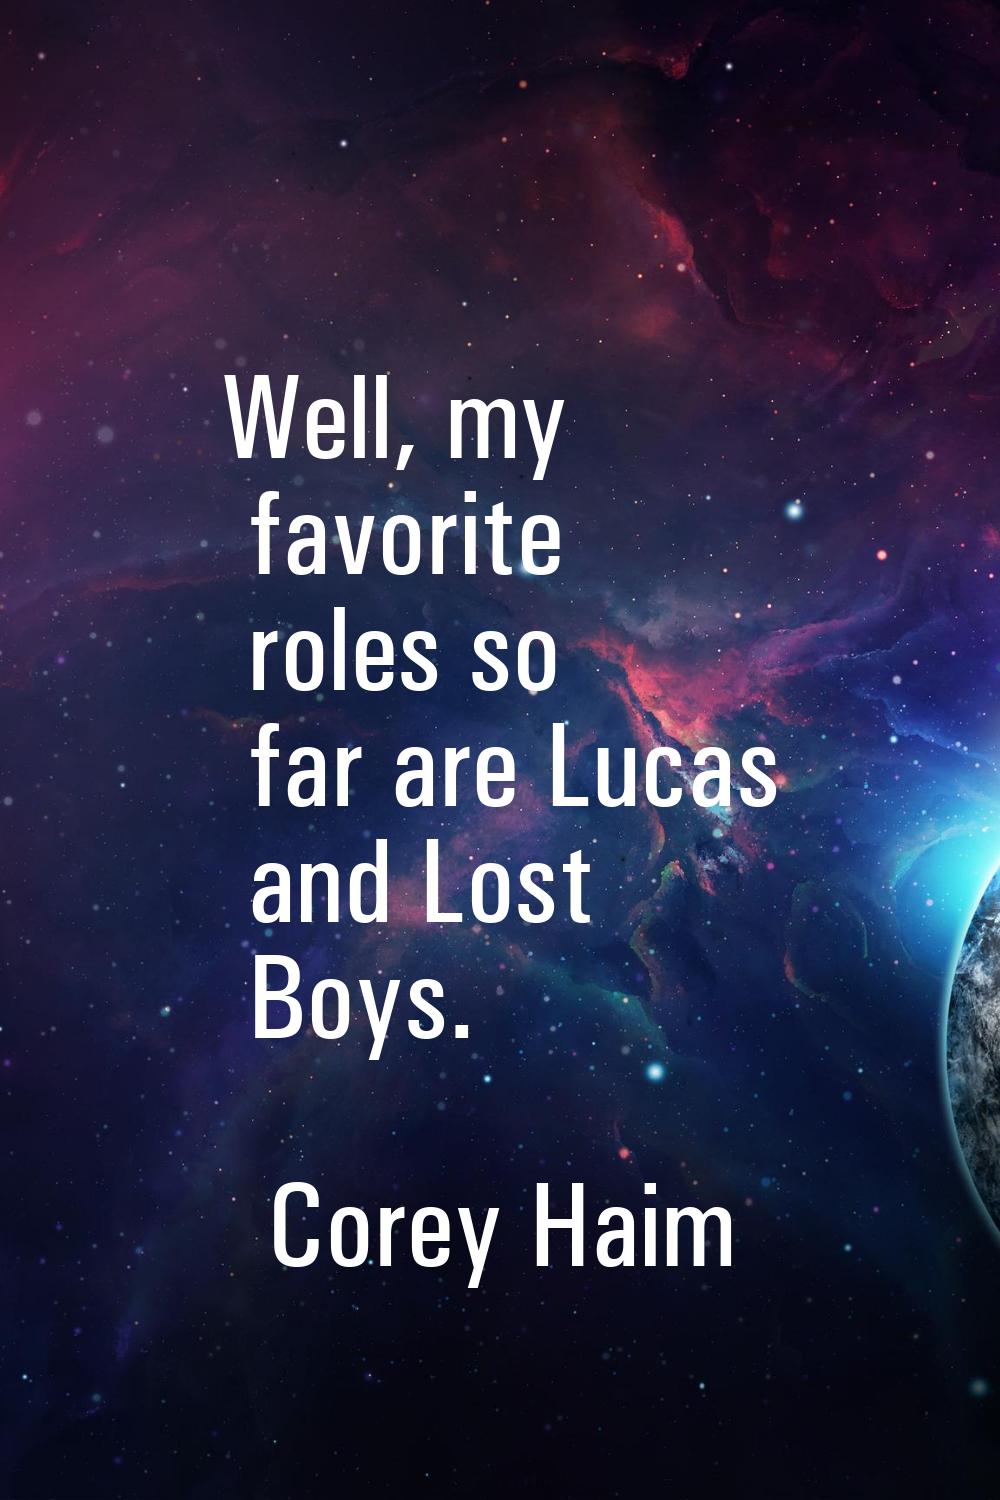 Well, my favorite roles so far are Lucas and Lost Boys.